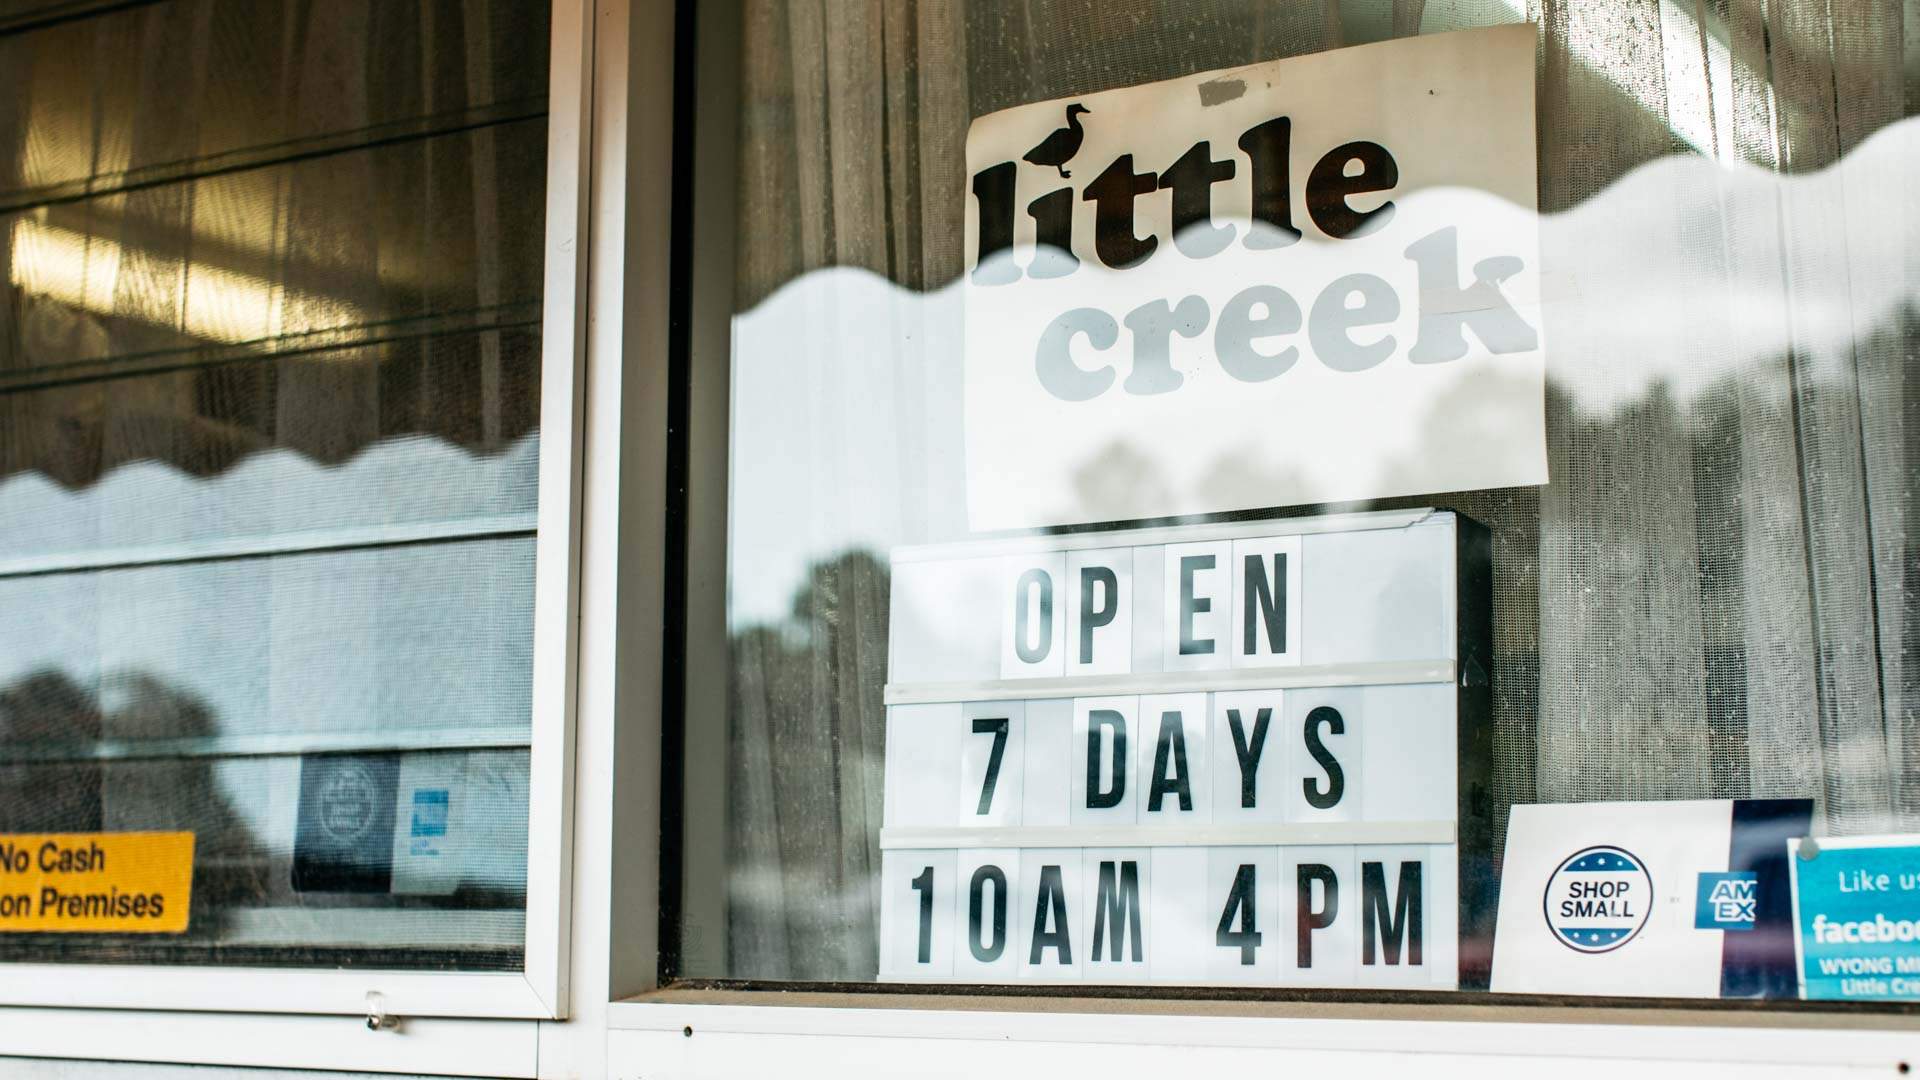 Signage at Little Cheese Creek, Central Coast, saying "open 7 days 10am 4pm"